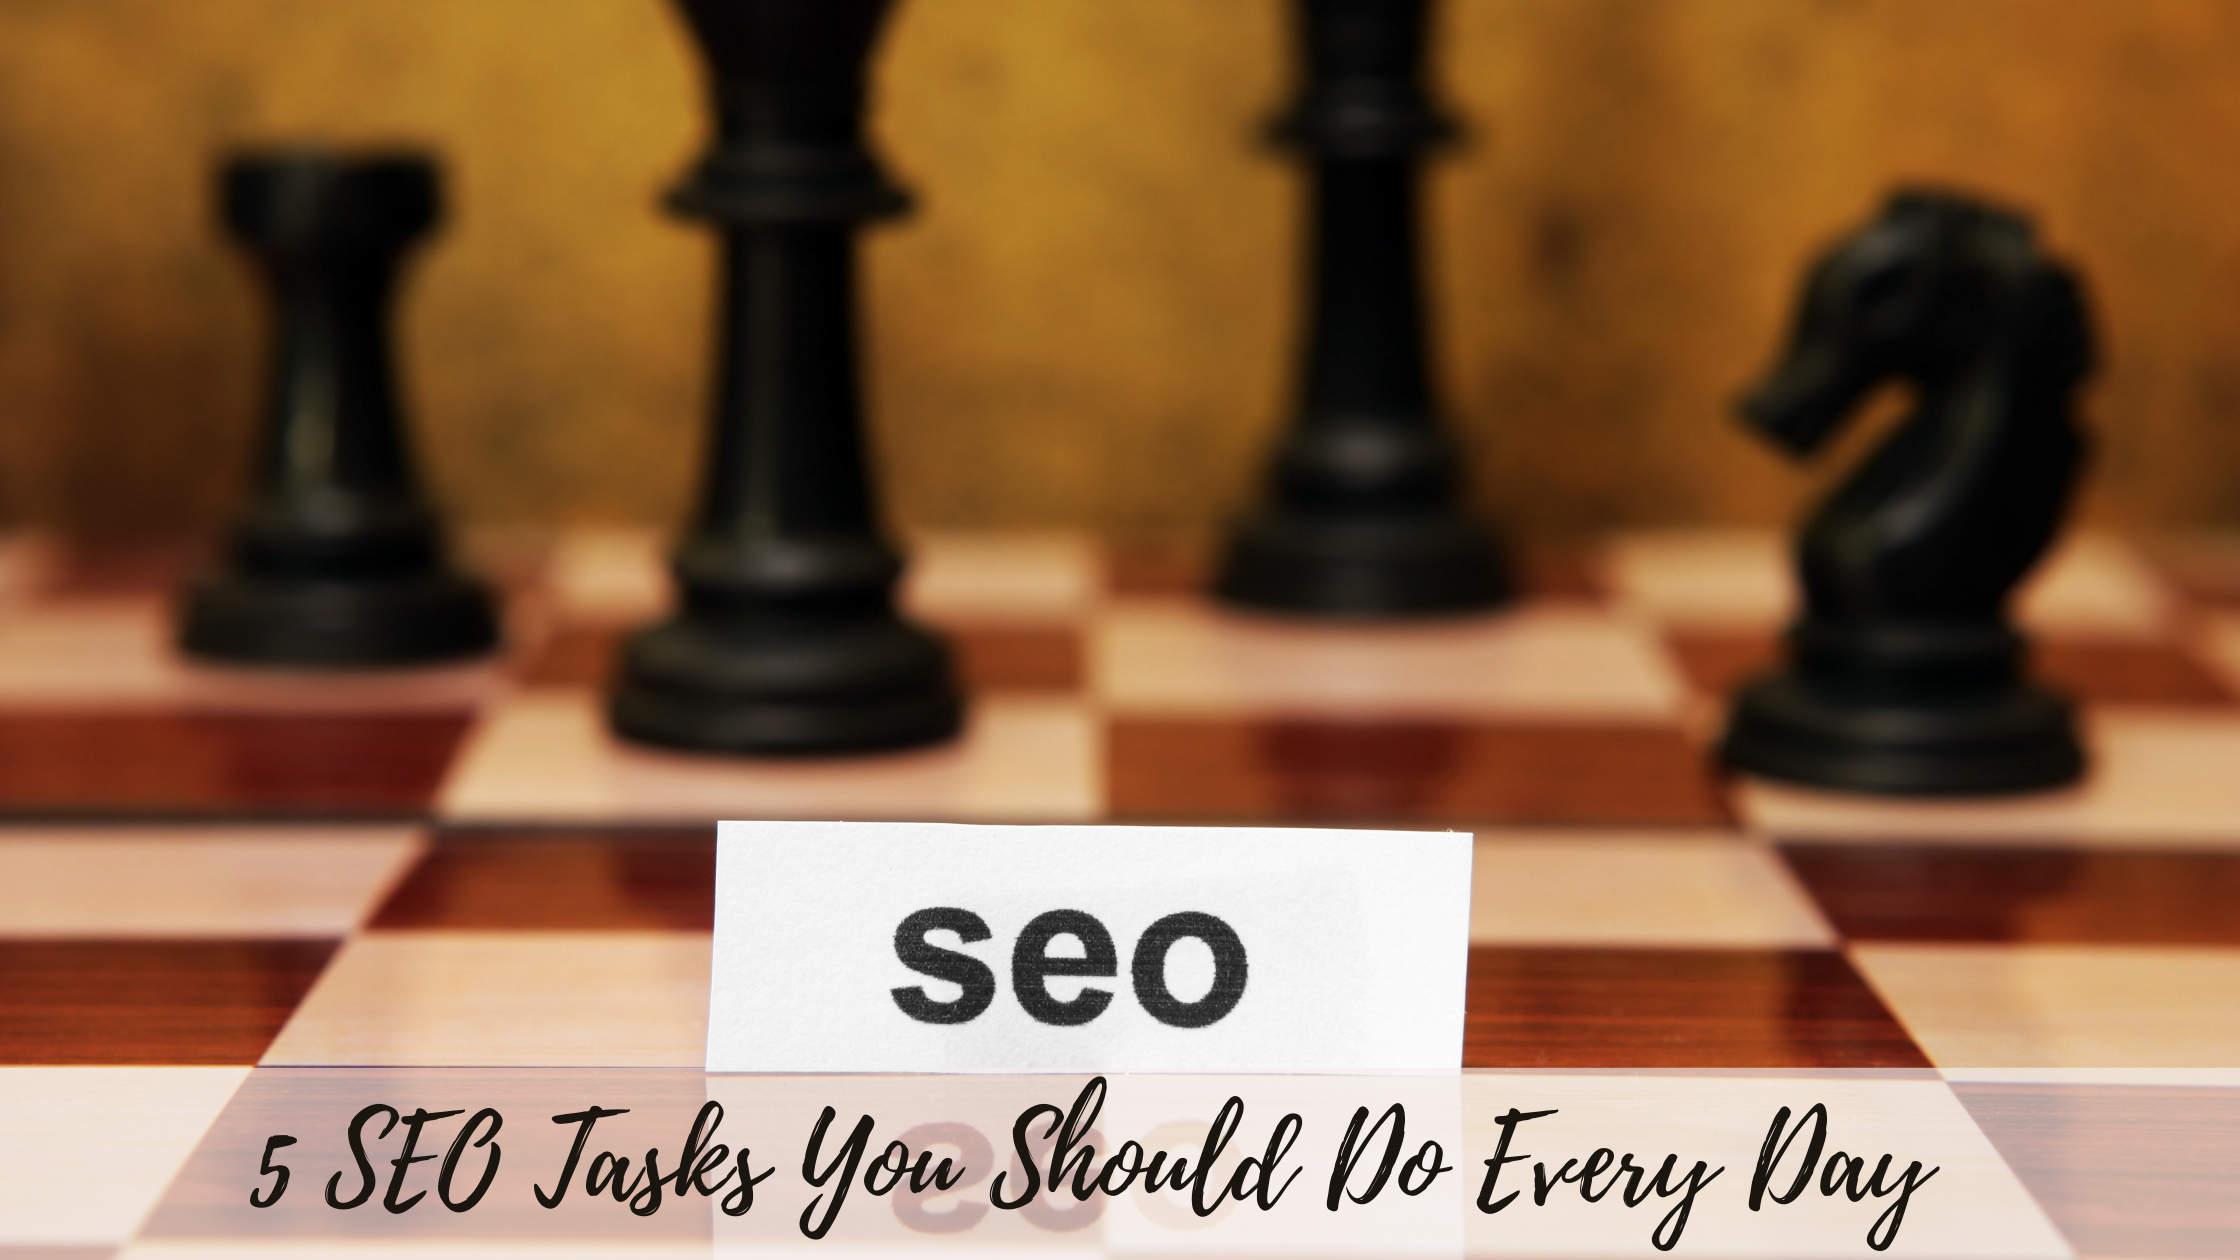 5 SEO Tasks You Should Do Every Day